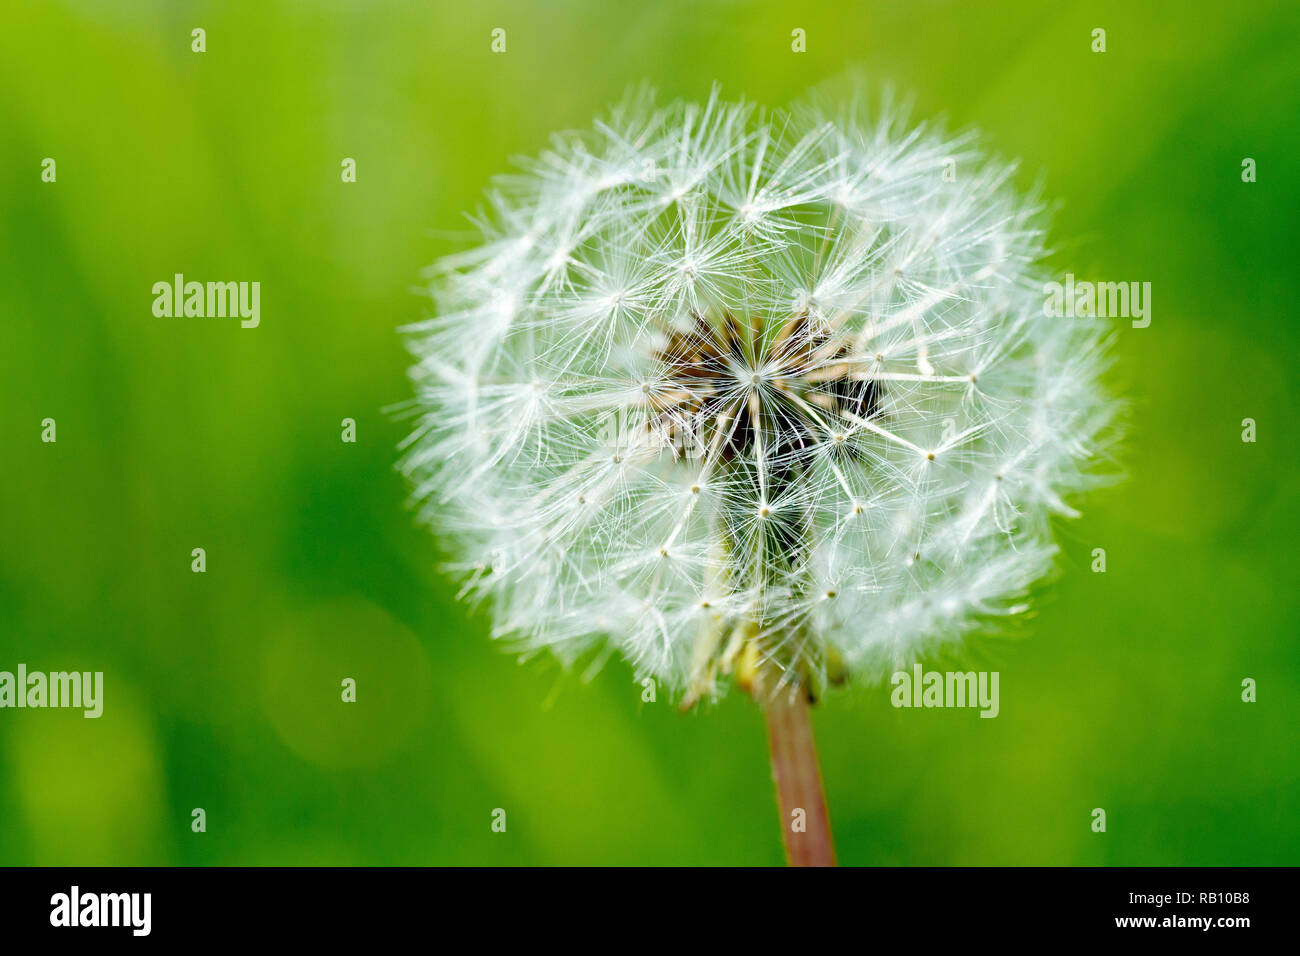 Dandelion seedhead (taraxacum officinale), close up of one backlit plant with low depth of field. Stock Photo